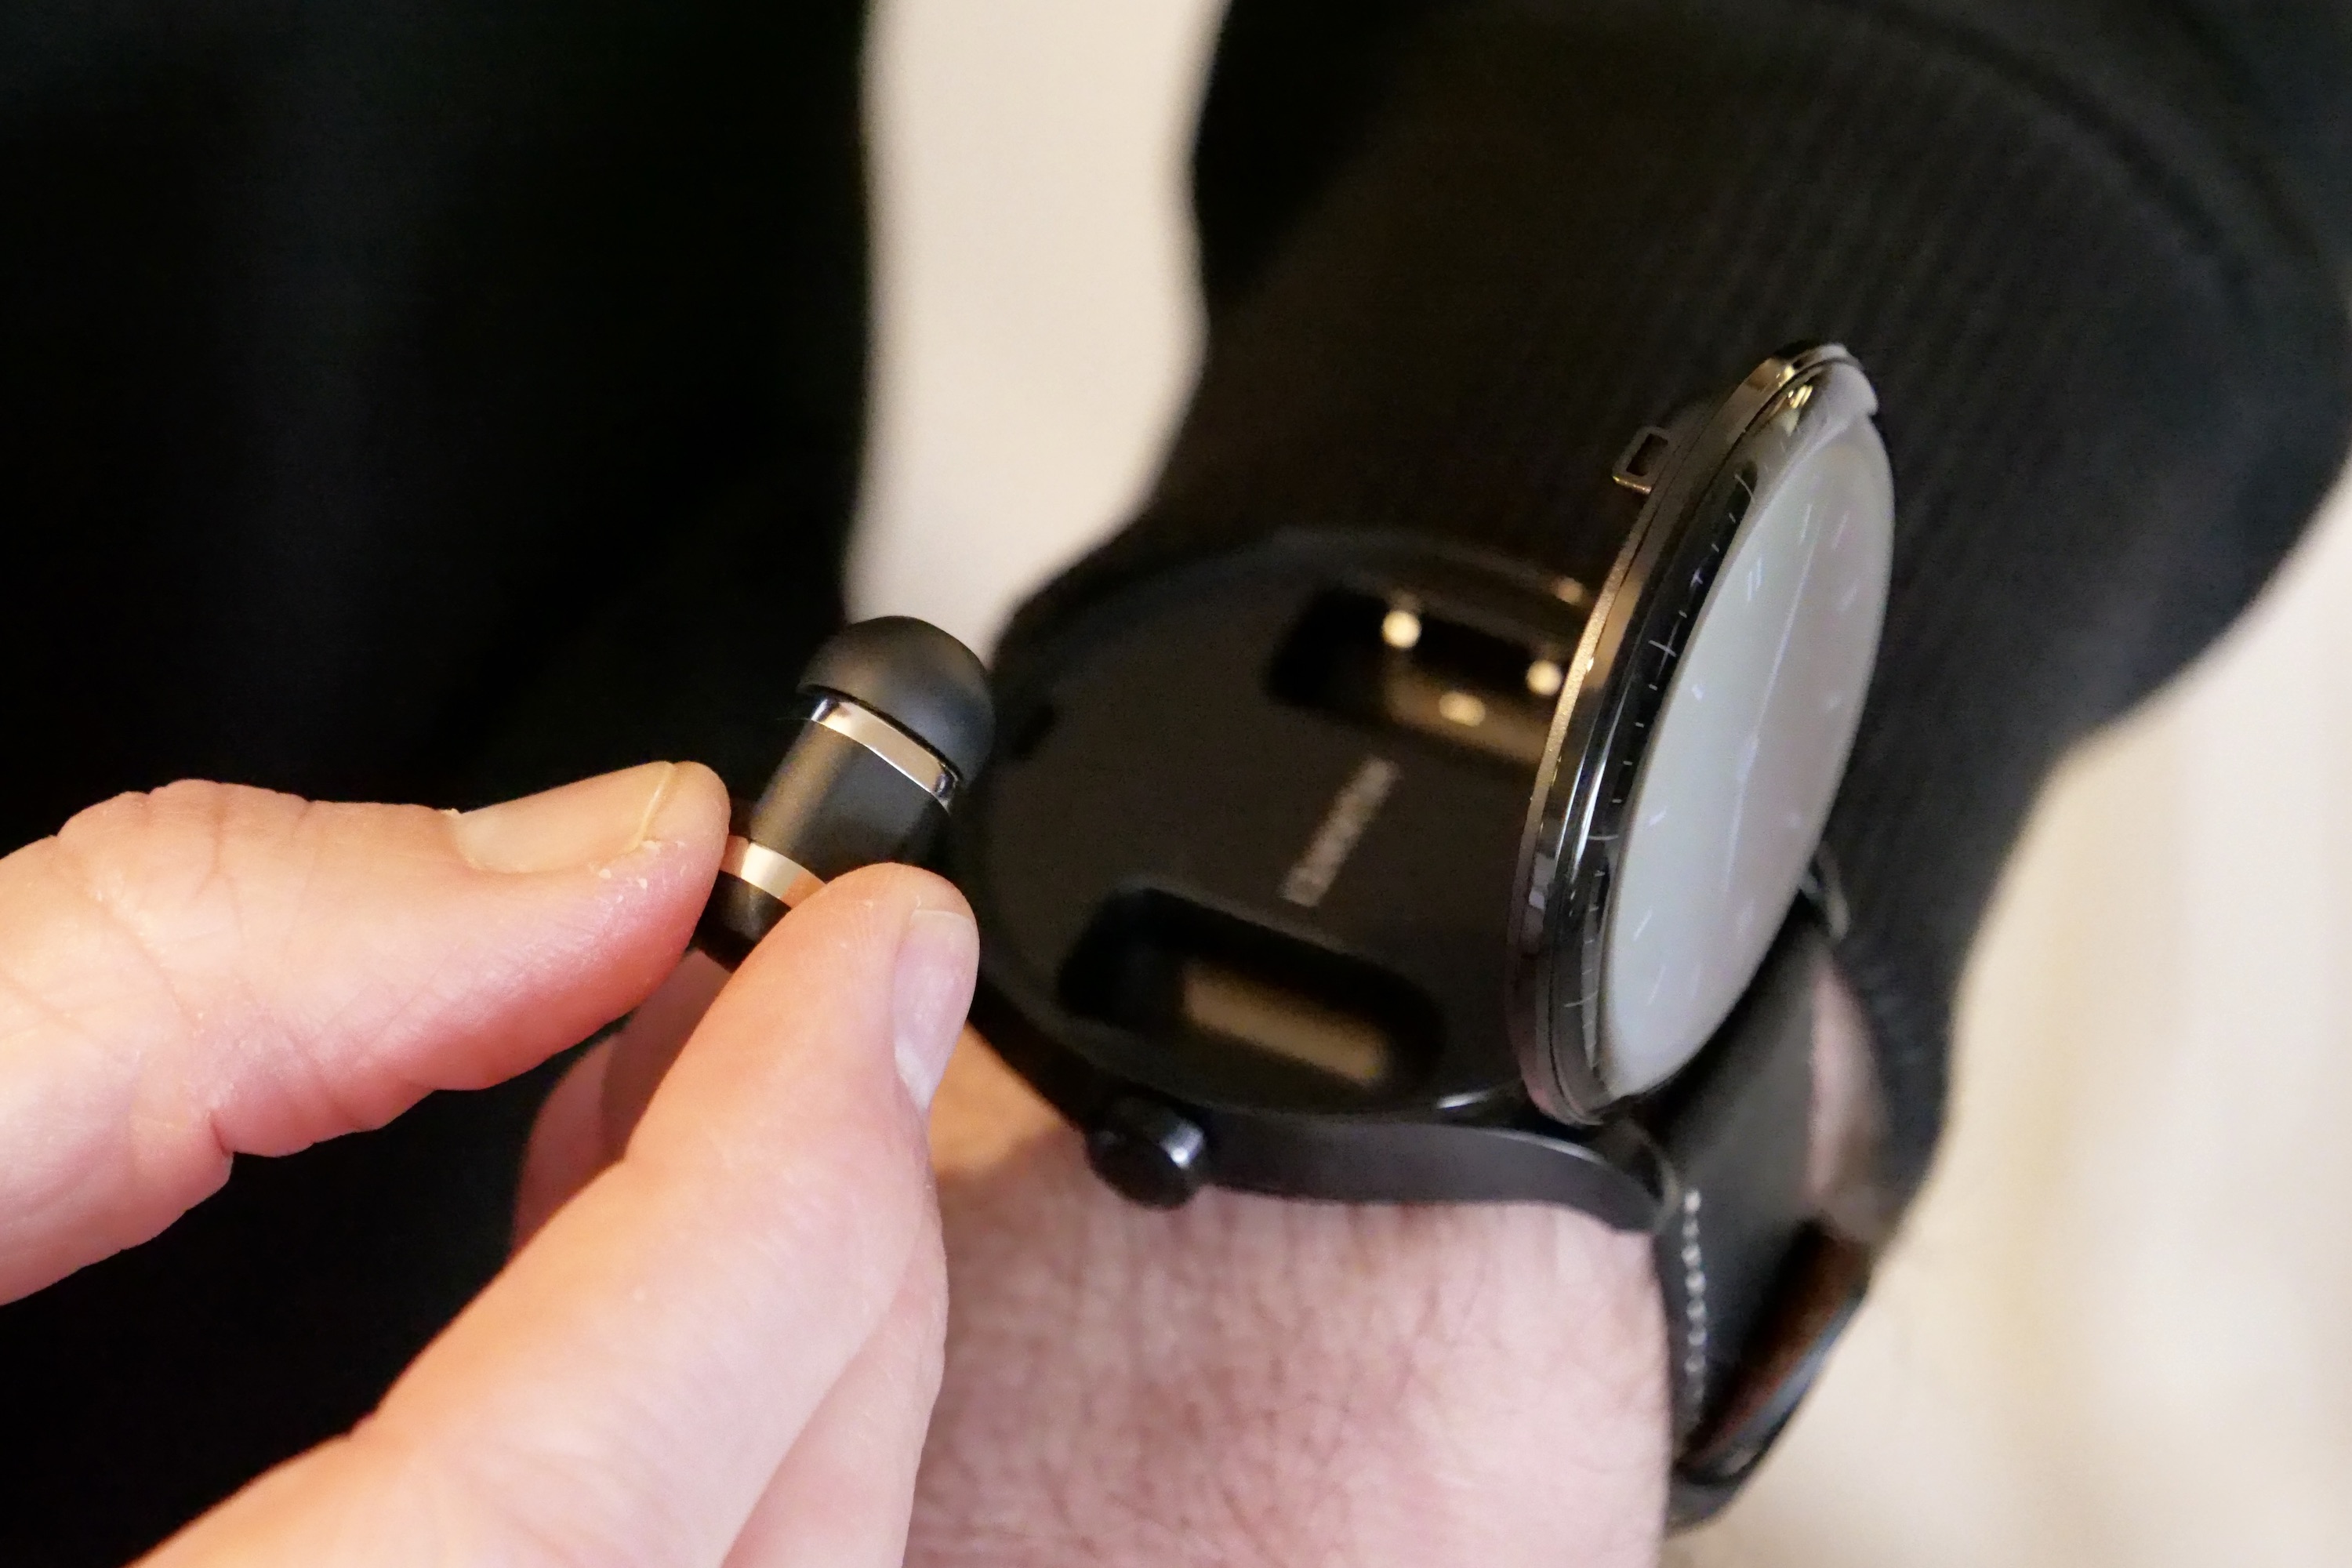 A person taking out one of the Huawei Watch Buds's earbuds.